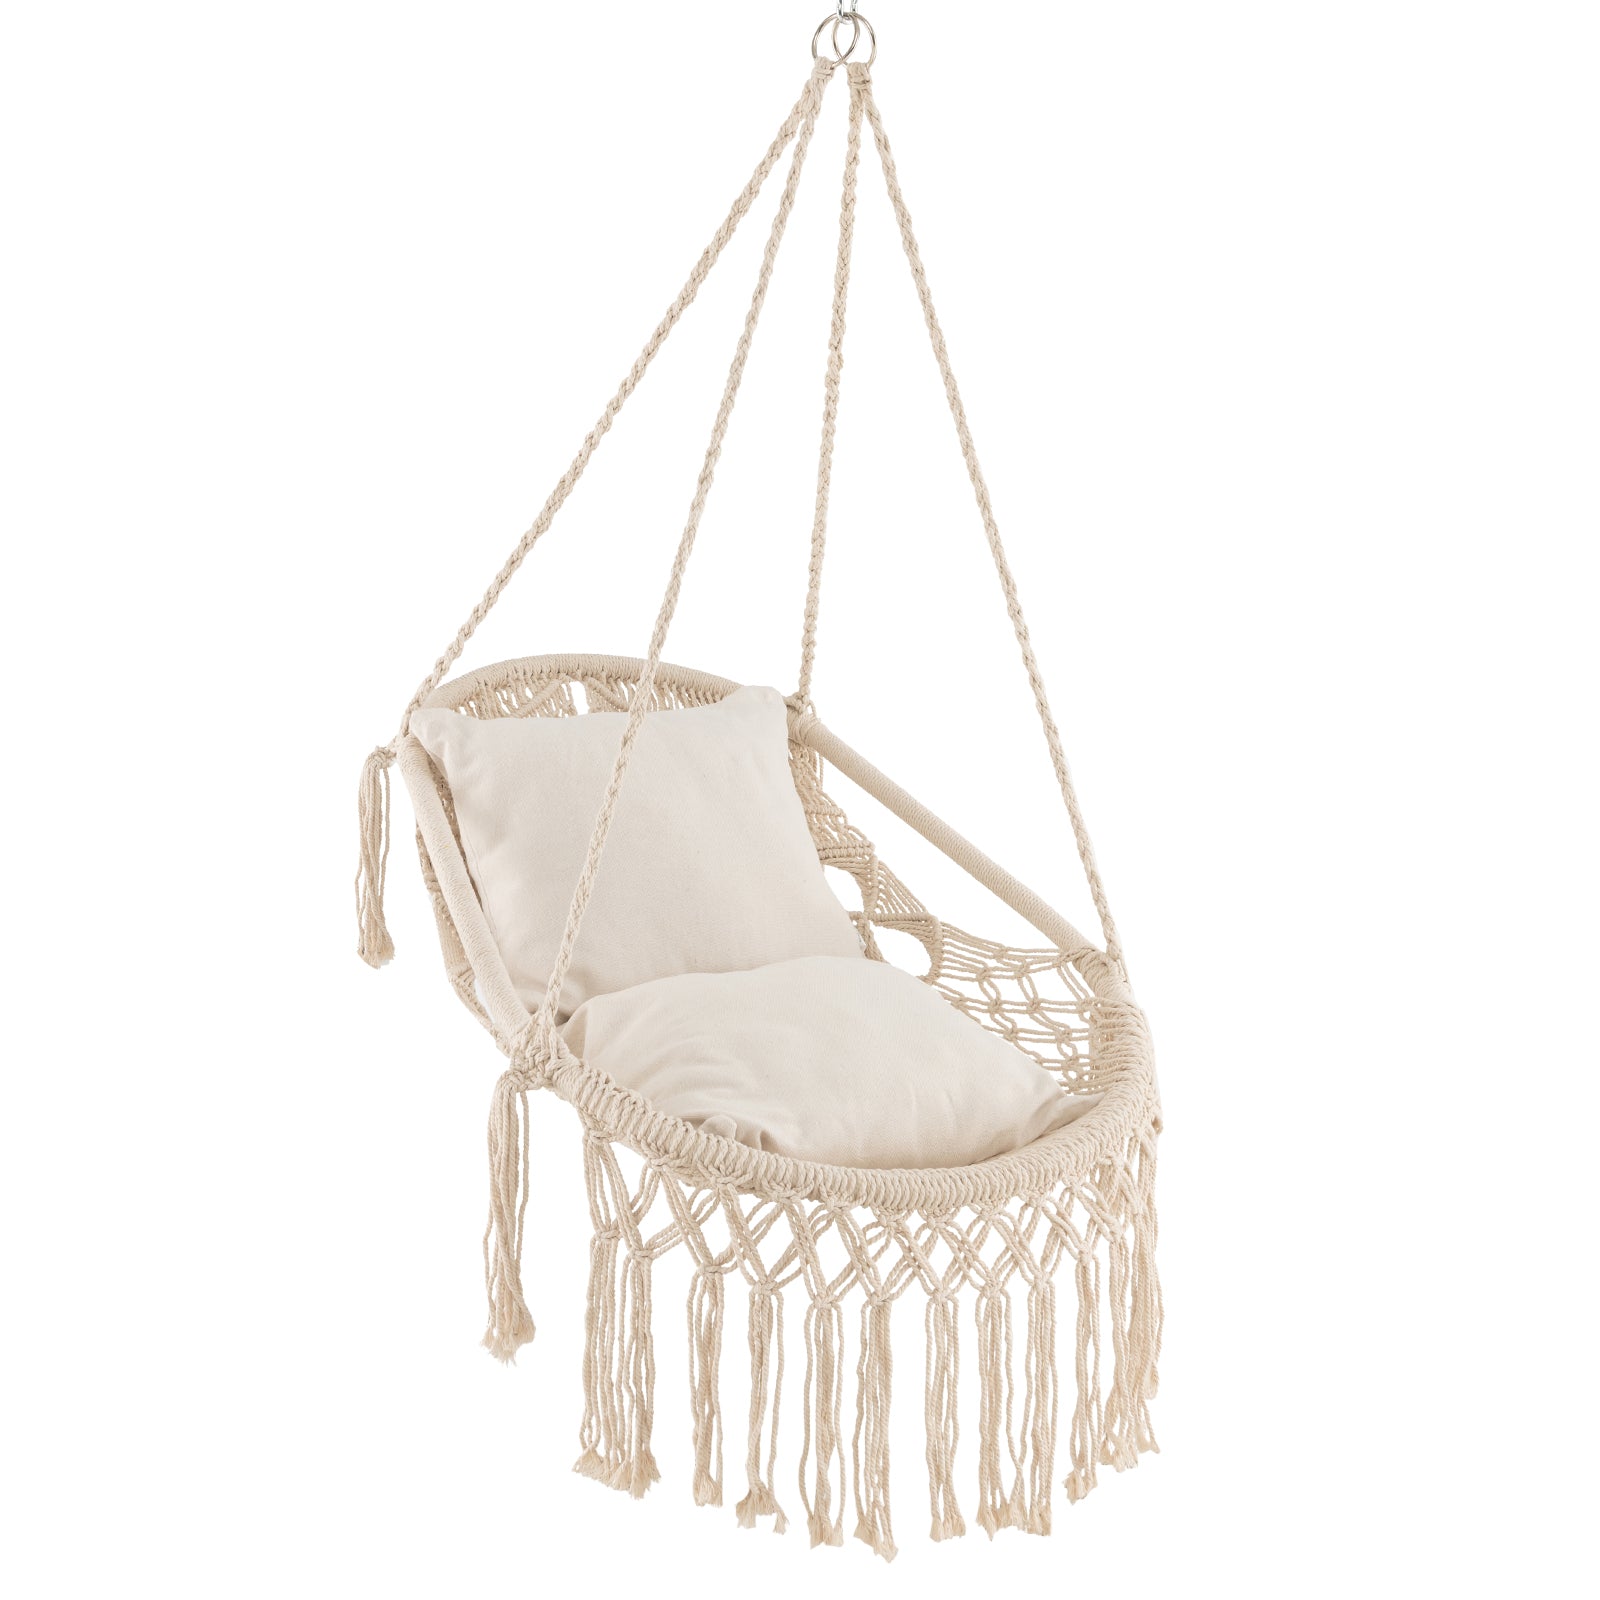 Hanging Hammock Chair with Soft Seat Cushions-Beige